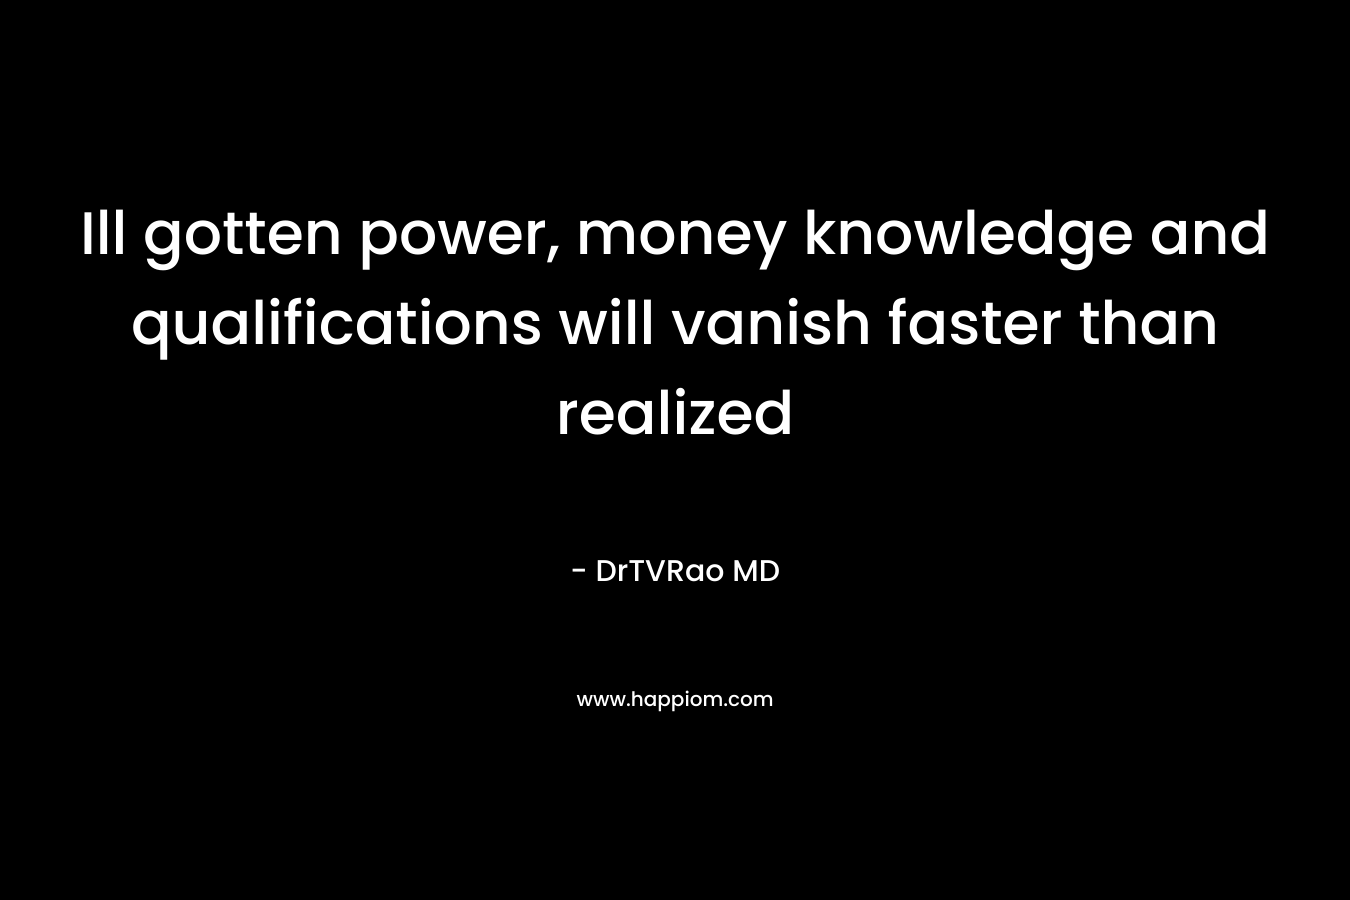 Ill gotten power, money knowledge and qualifications will vanish faster than realized